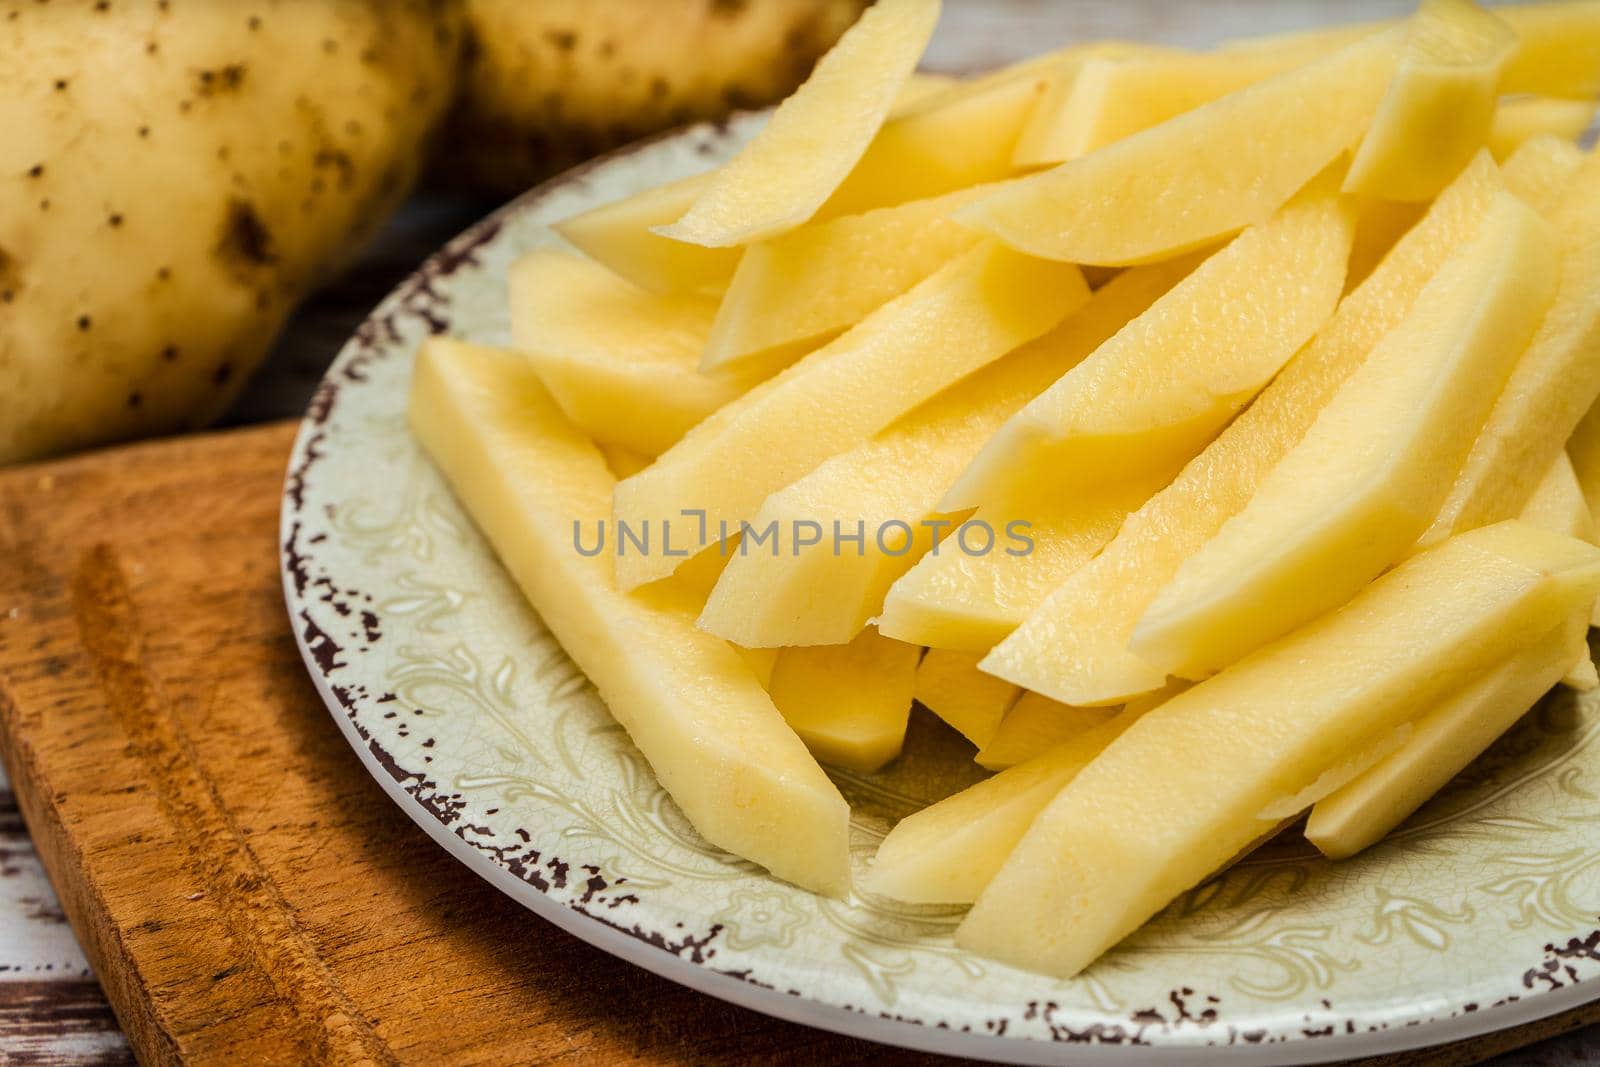 Dish with raw cane potatoes to make french fries. Chopped or high view. close-up.